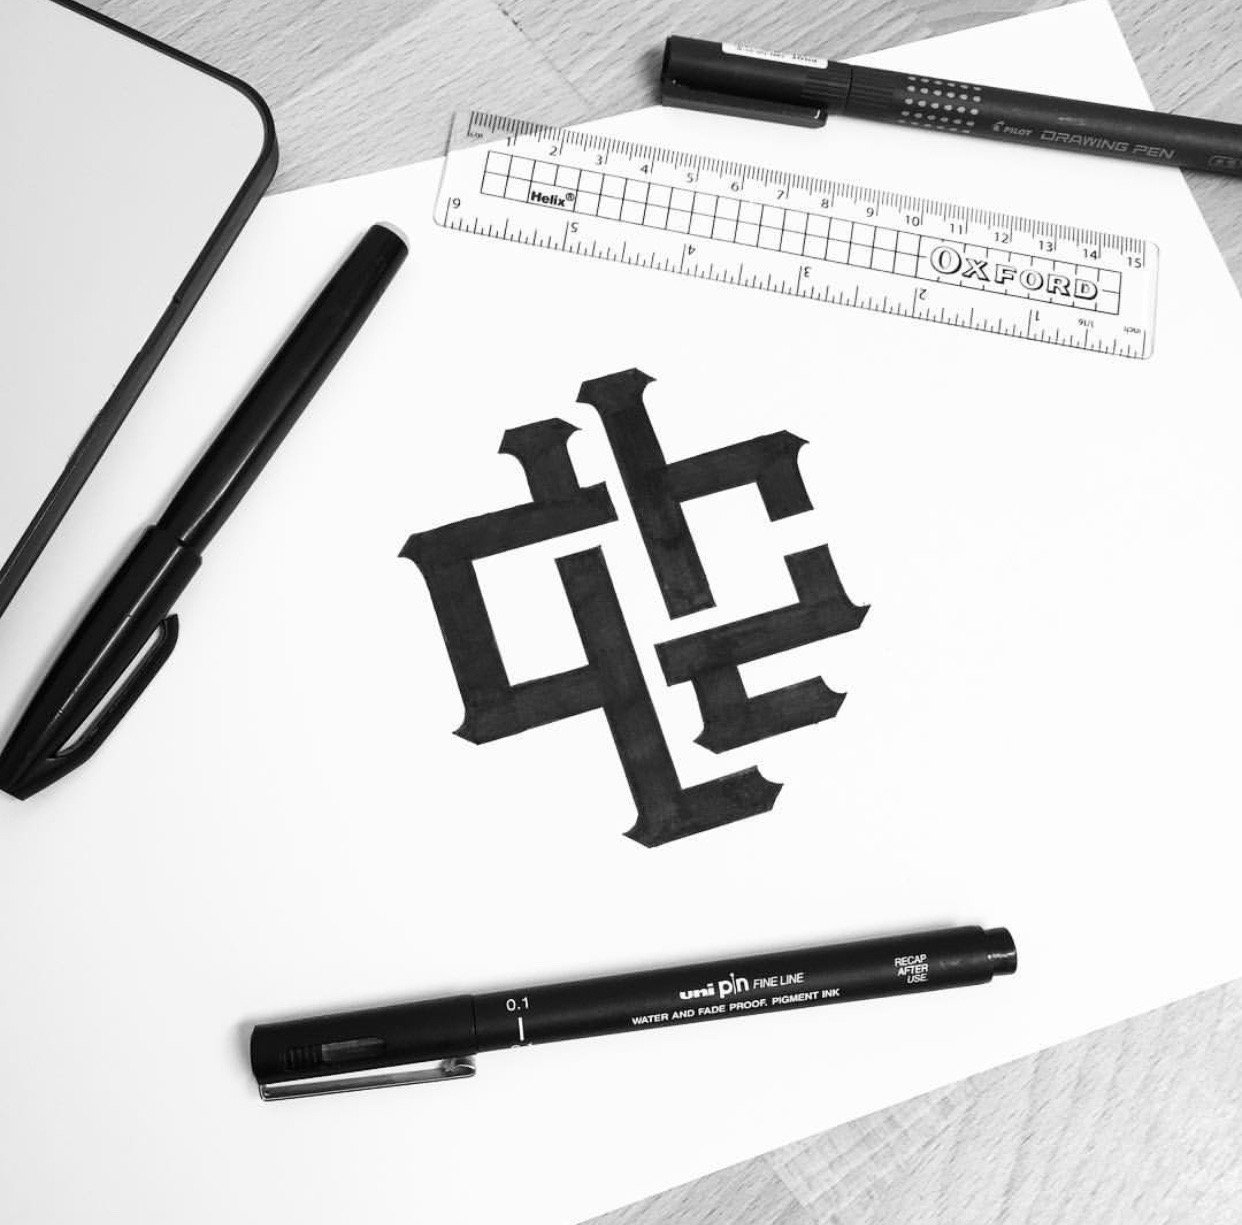 Monogram, design and lettering with pens and tools around